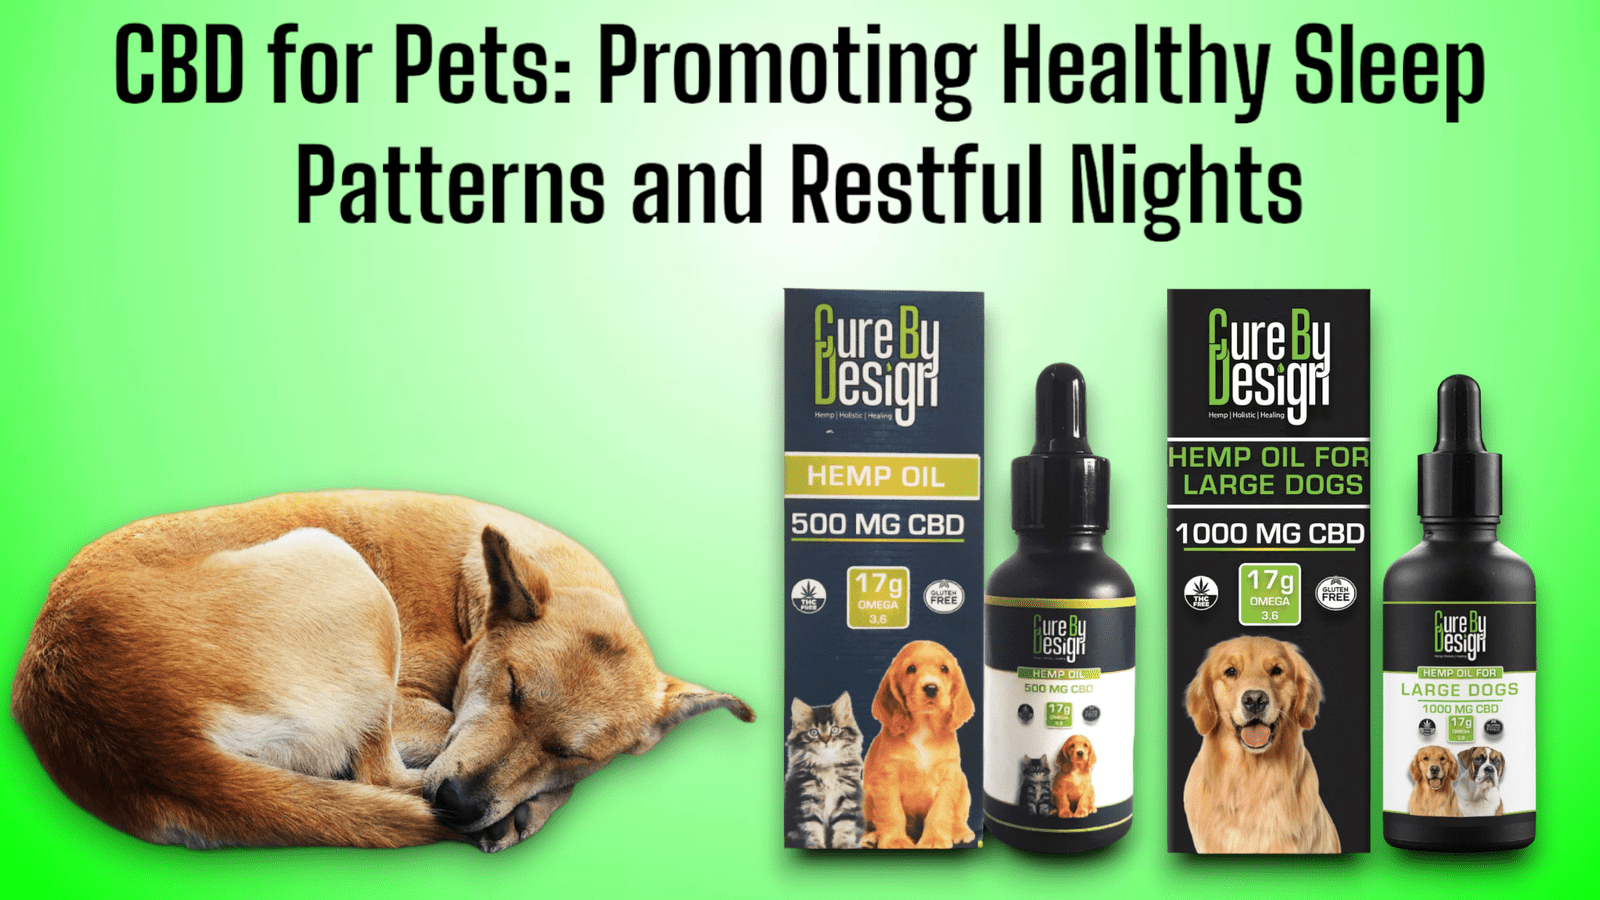 CBD for Pets: Promoting Healthgy Sleep Patterns and Restful Nights